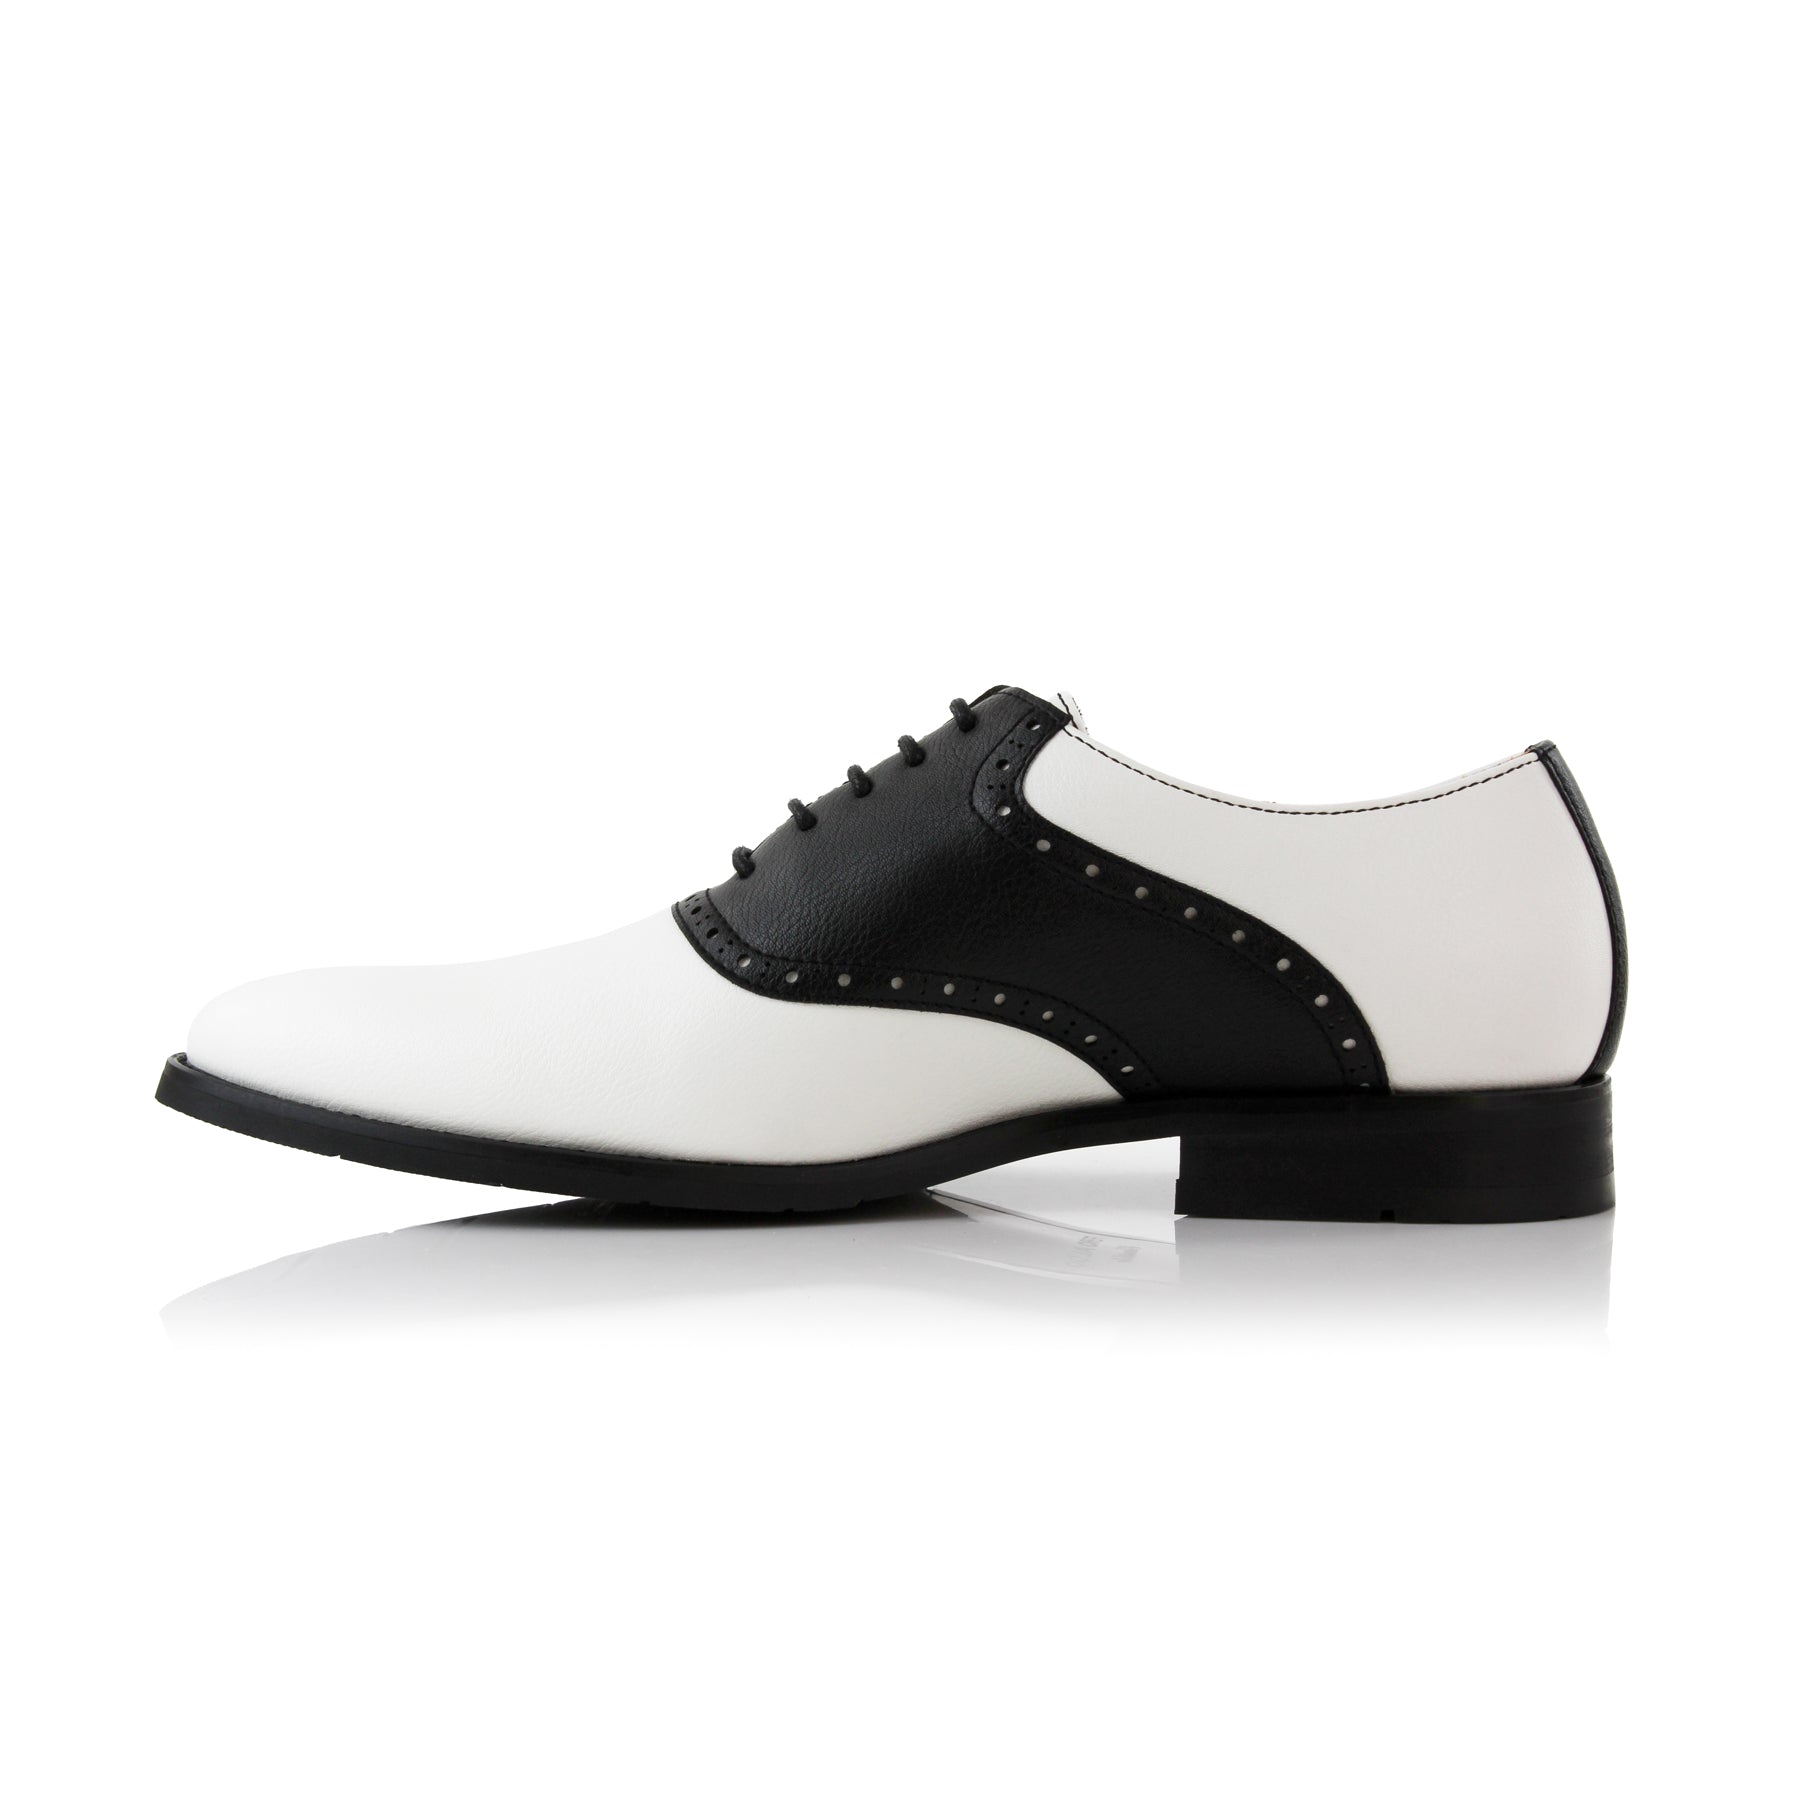 Two-Toned Perforated Oxfords | Jordan by Ferro Aldo | Conal Footwear | Inner Side Angle View